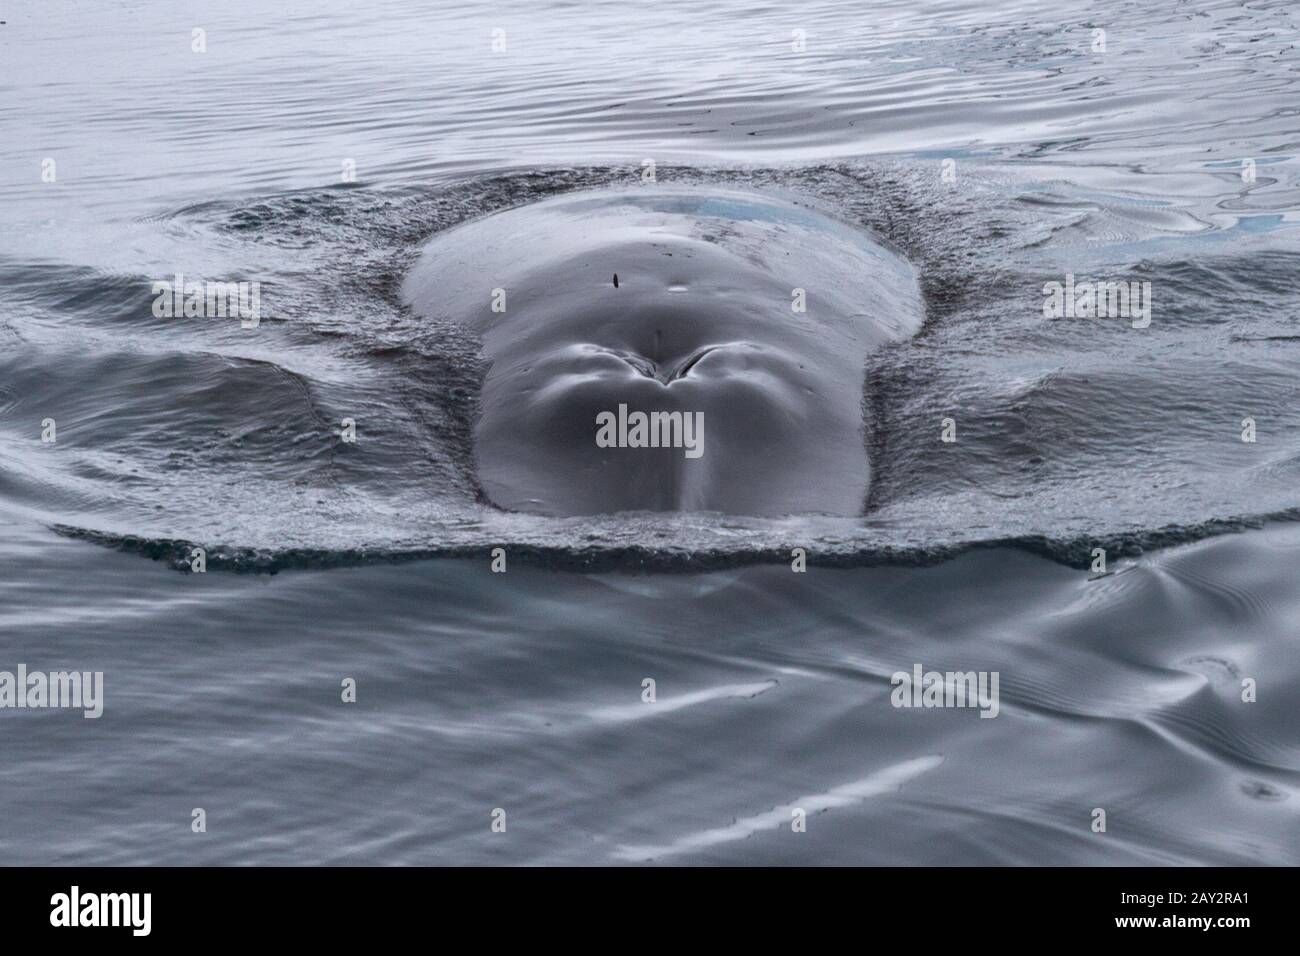 head and part of the back floated on the surface of Minke whale Stock Photo